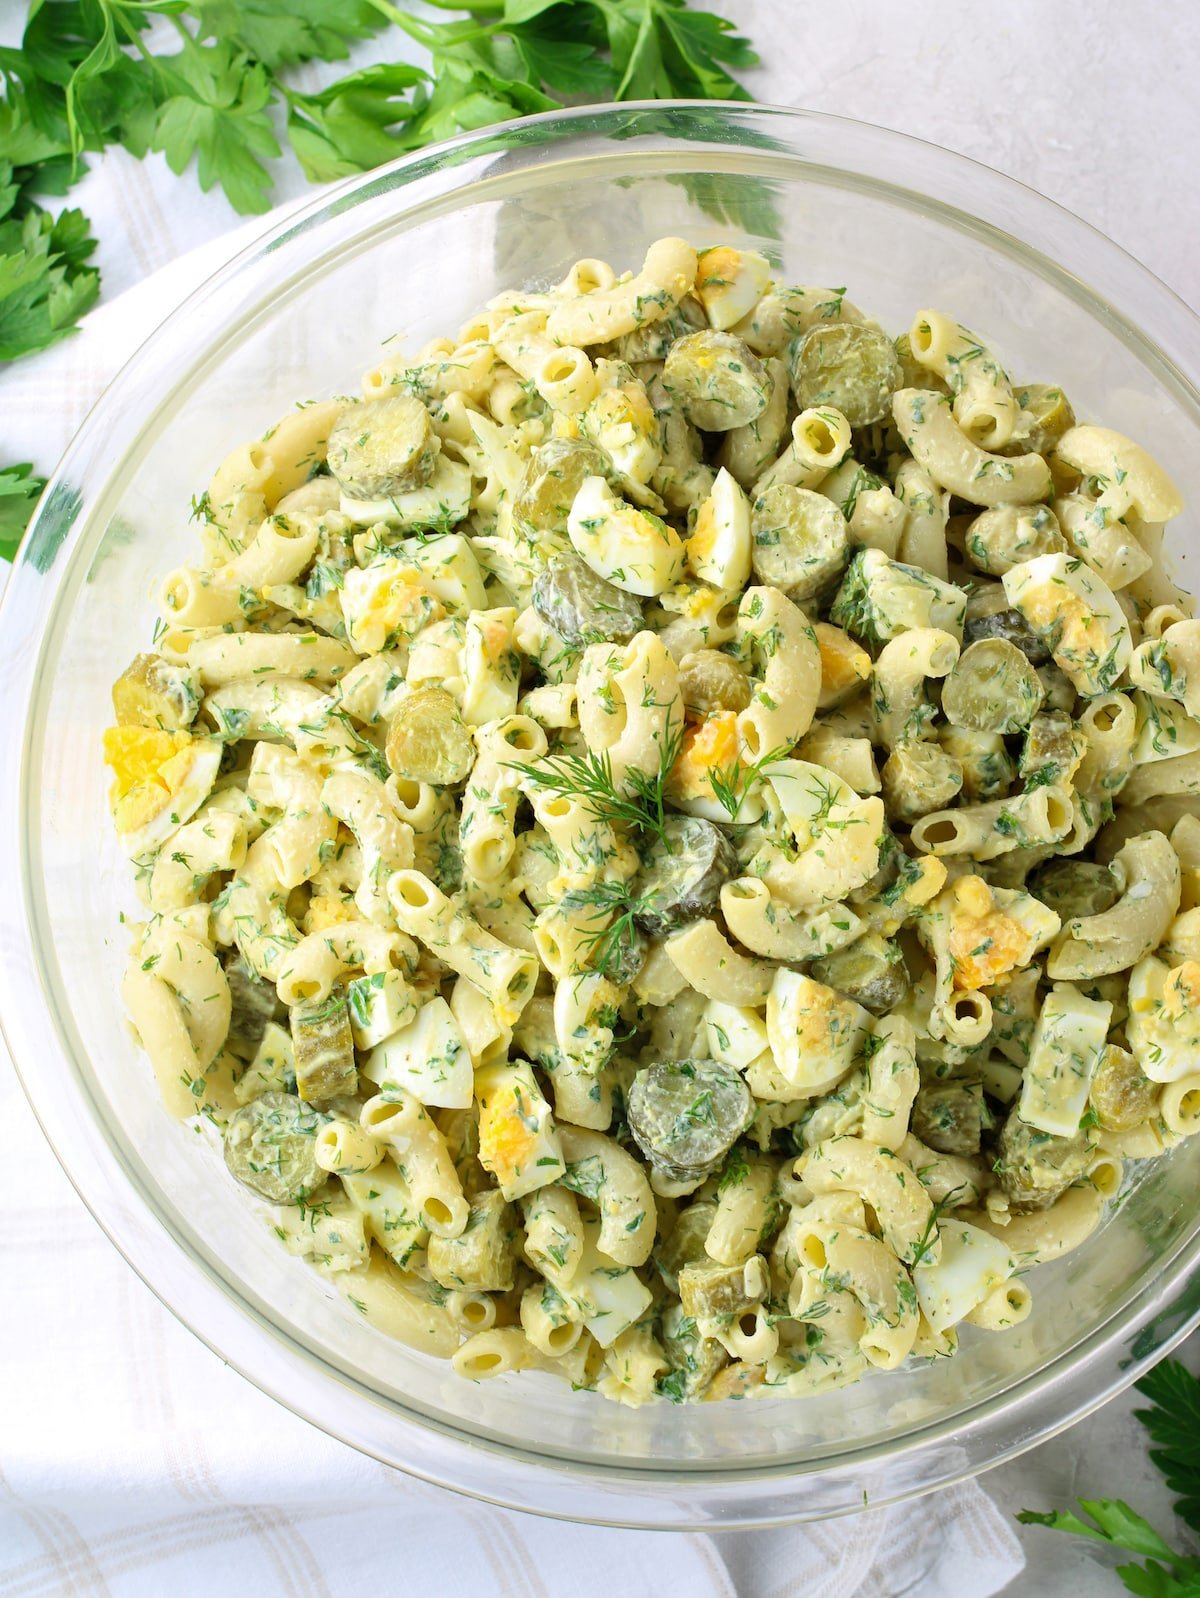 A bowl of Macaroni Pasta salad with dill.